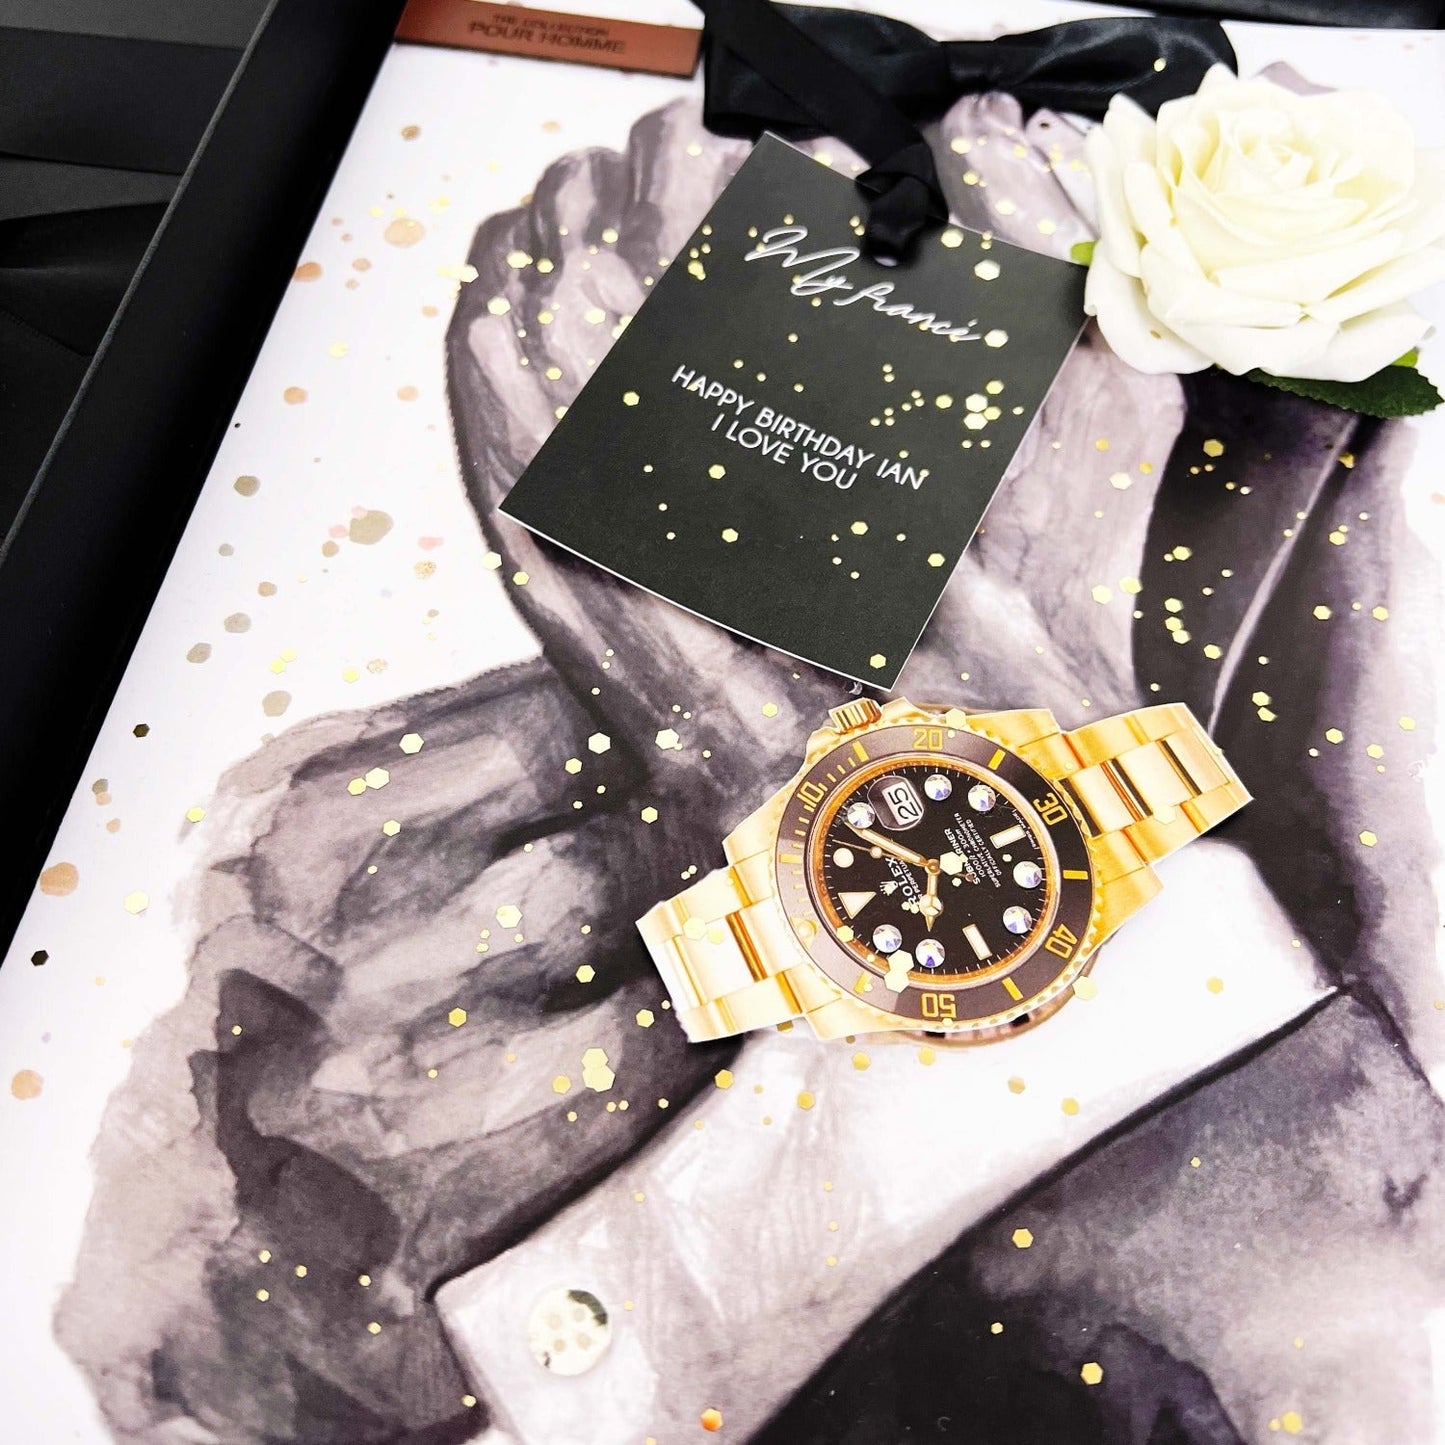 Personalised 50th card for husband 50th birthday scented greetings card for him with Swarosvki crystal encrusted rolex style watch.